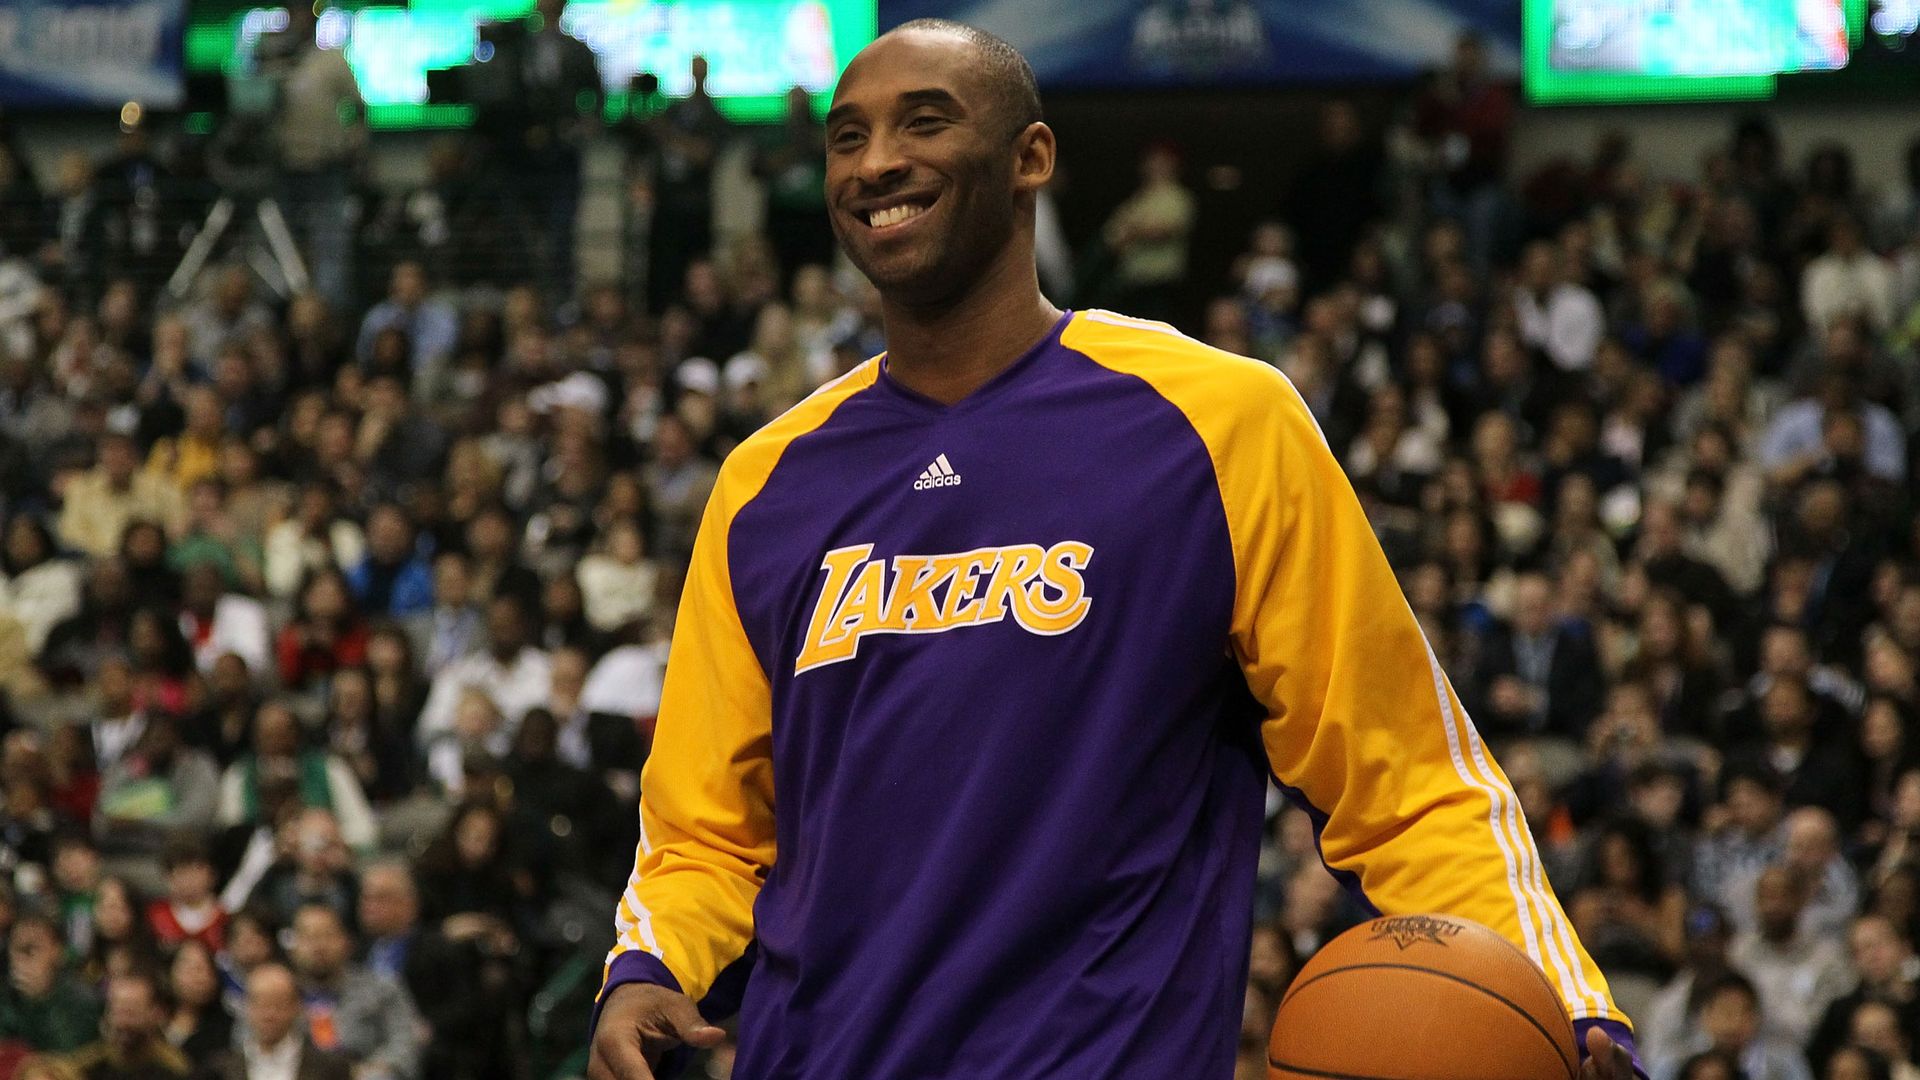 Kobe Bryant of the Los Angeles Lakers smiles while on court 